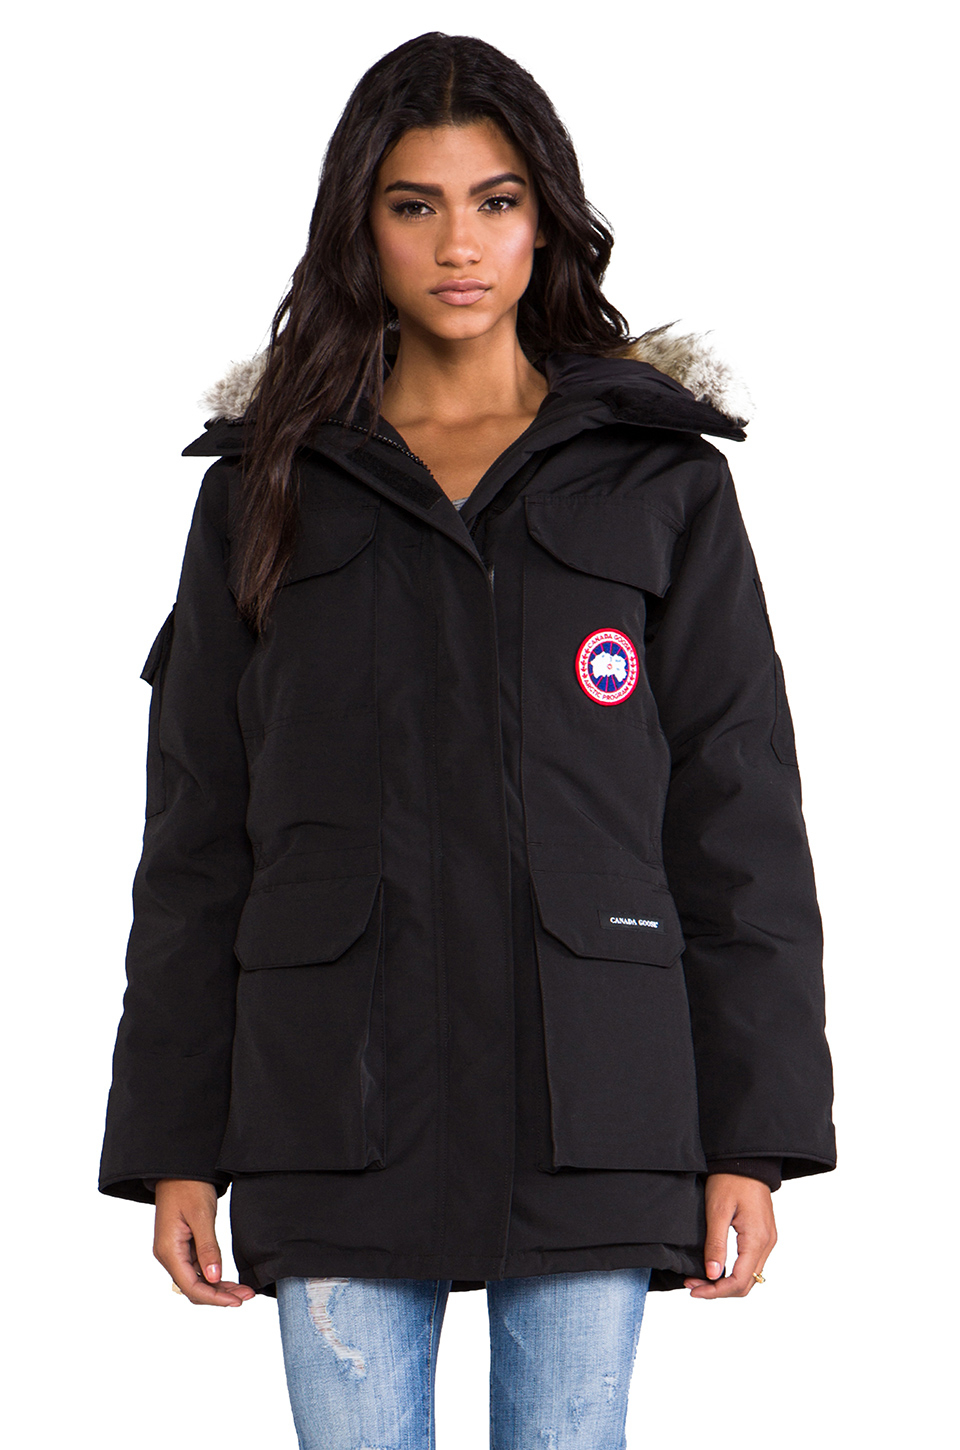 Lyst - Canada Goose Expedition Parka With Coyote Fur Trim in Black